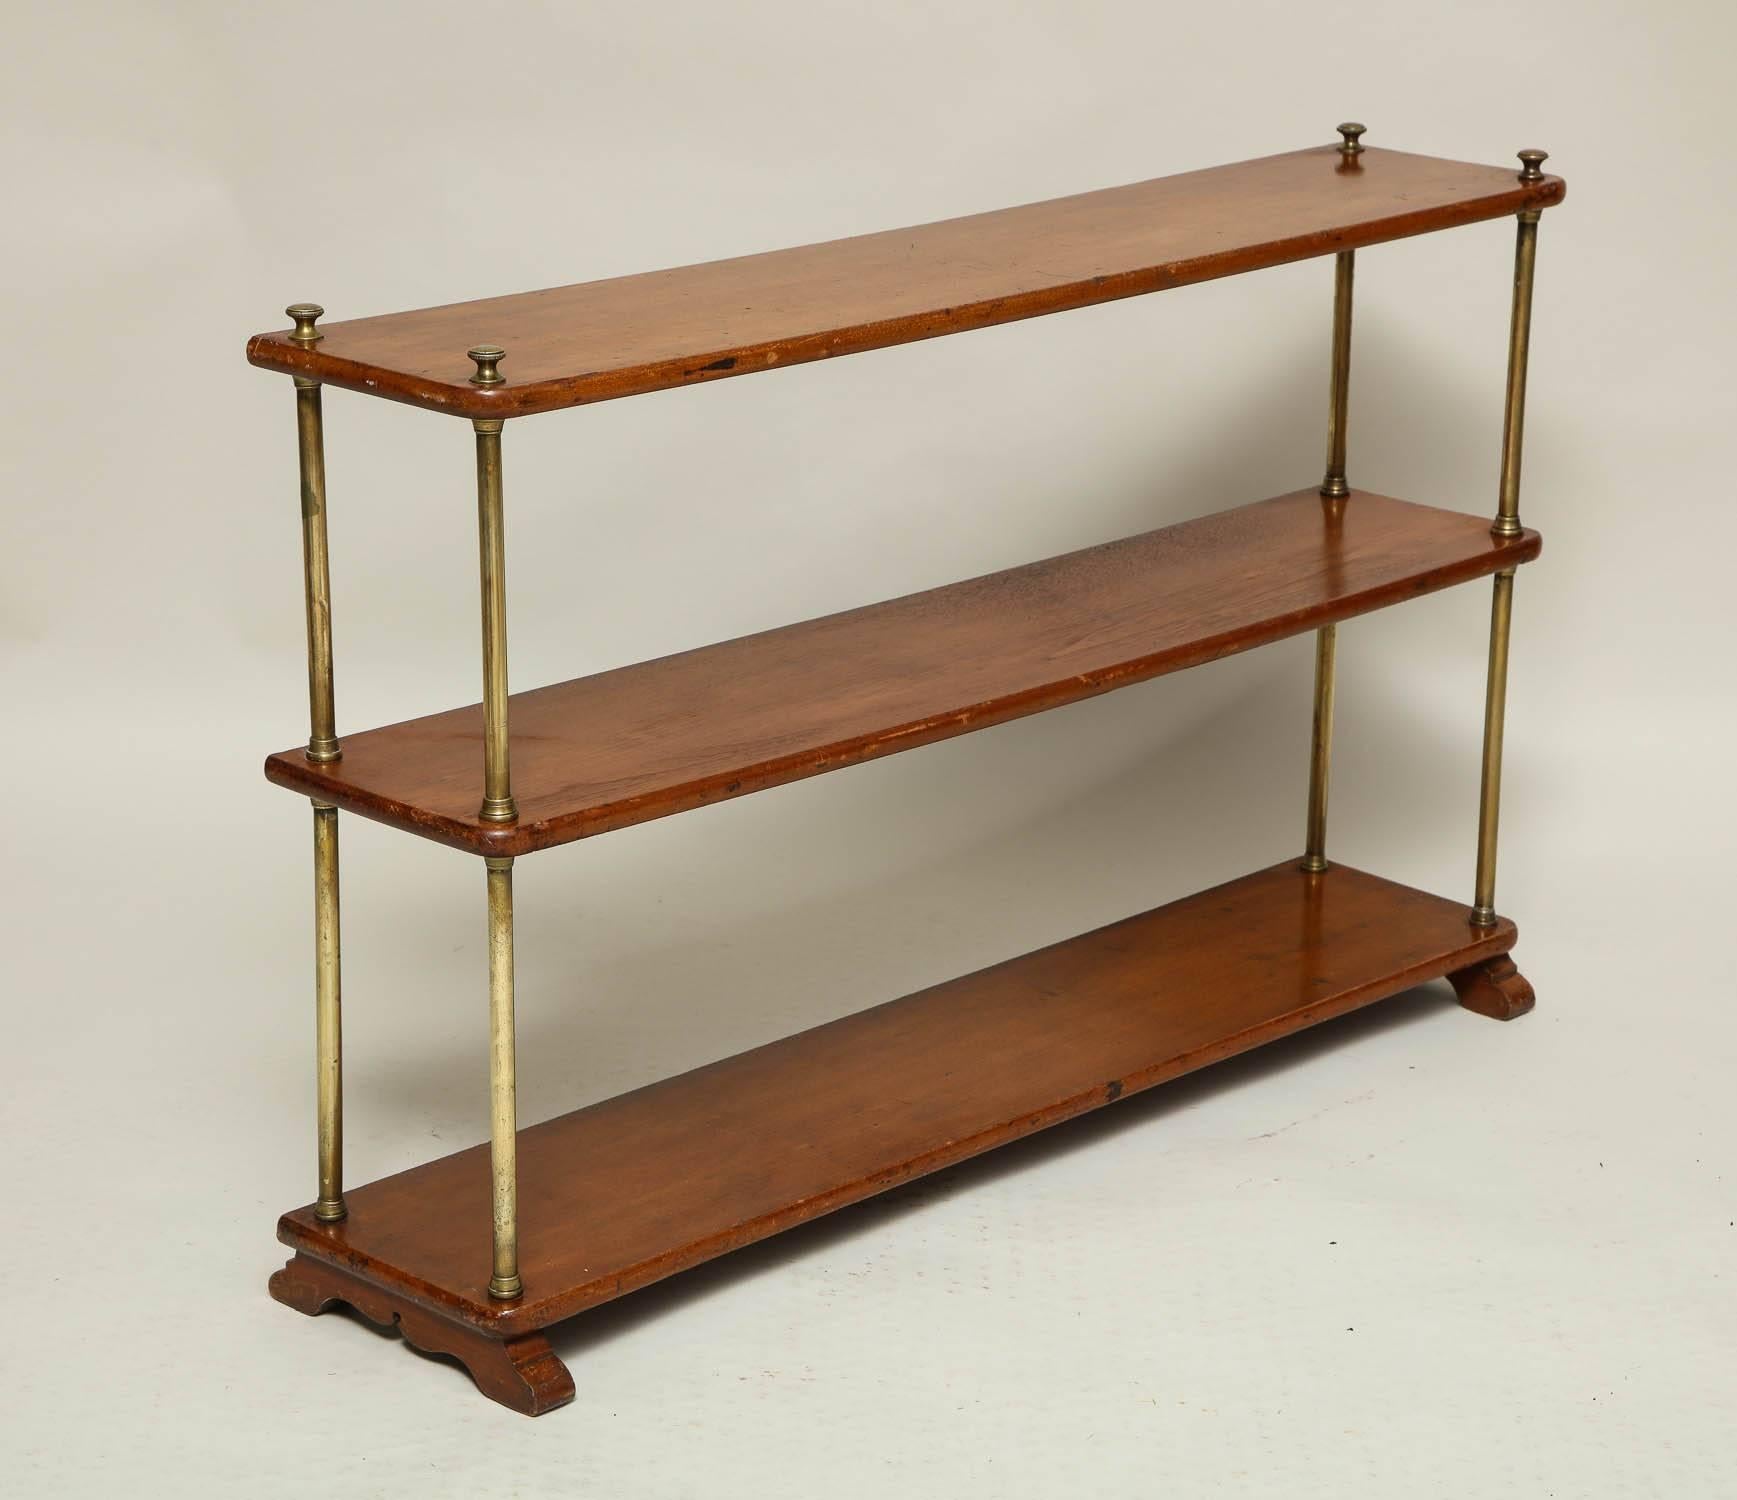 English 19th century brass and mahogany three tier campaign bookshelf standing on scalloped shoe feet, having good mellow color.  Disassembles for traveling.